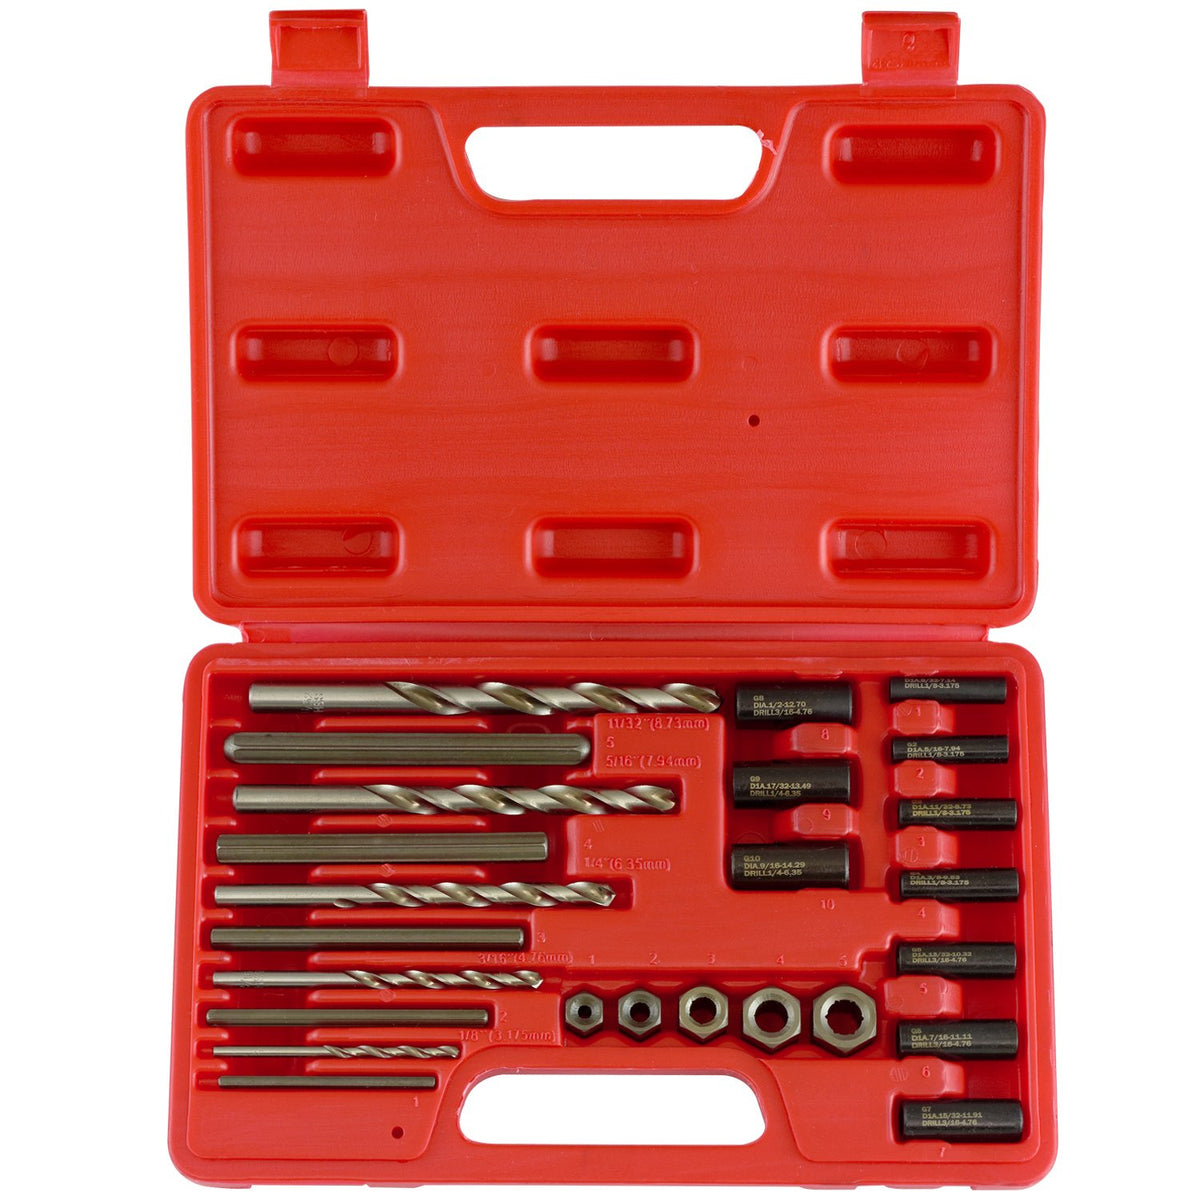 Screw Extractor | 25pc Drill & Guide Set Remove Broken Bolts Fasteners Easy Out